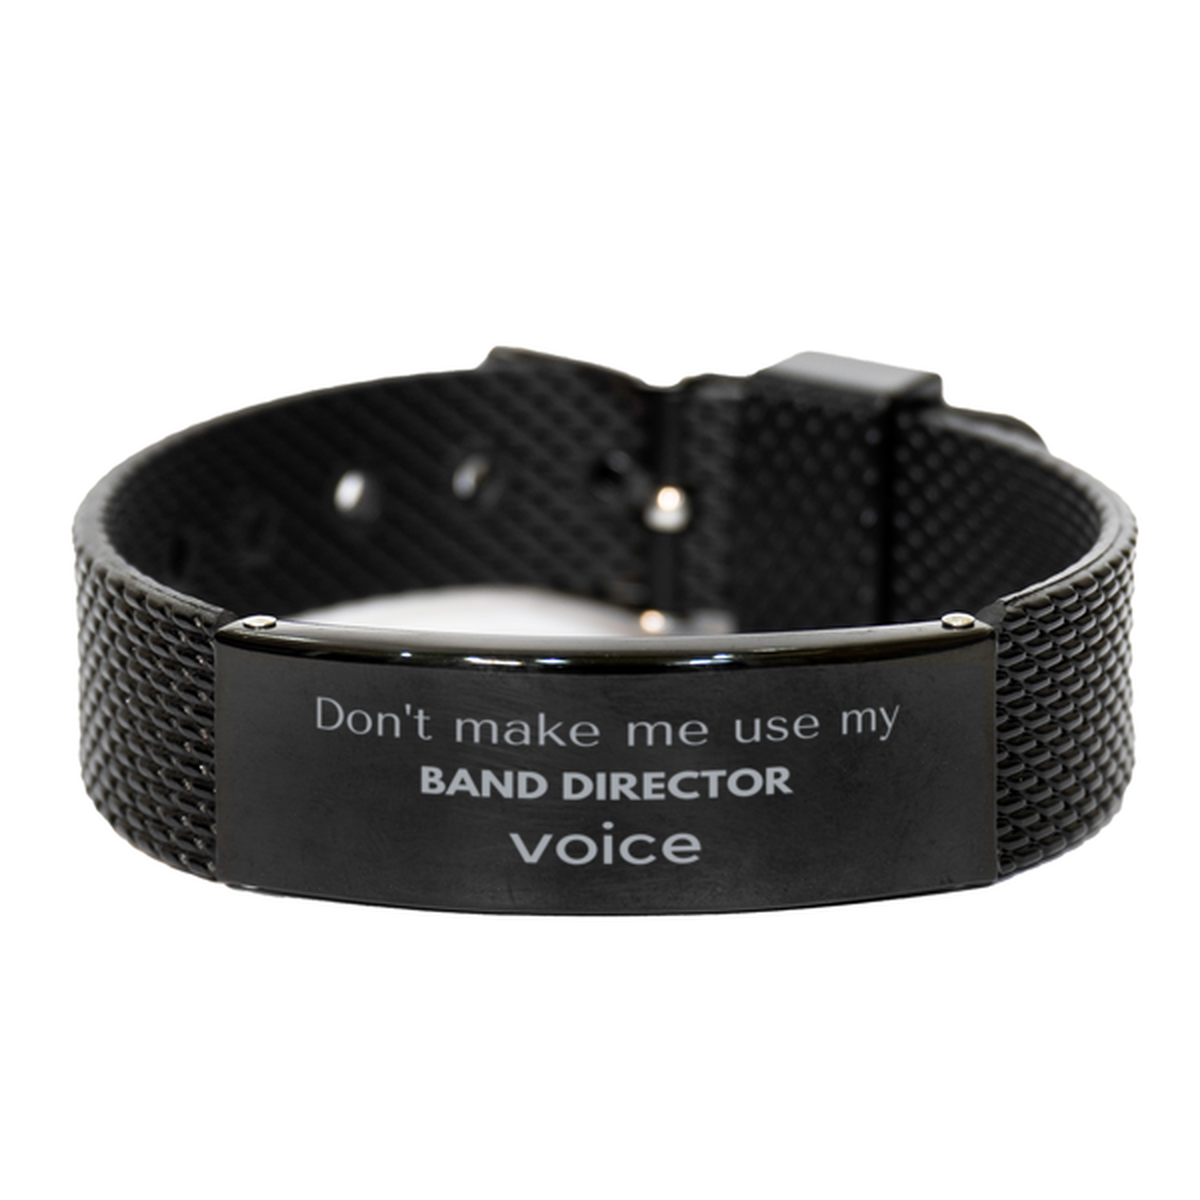 Don't make me use my Band Director voice, Sarcasm Band Director Gifts, Christmas Band Director Black Shark Mesh Bracelet Birthday Unique Gifts For Band Director Coworkers, Men, Women, Colleague, Friends